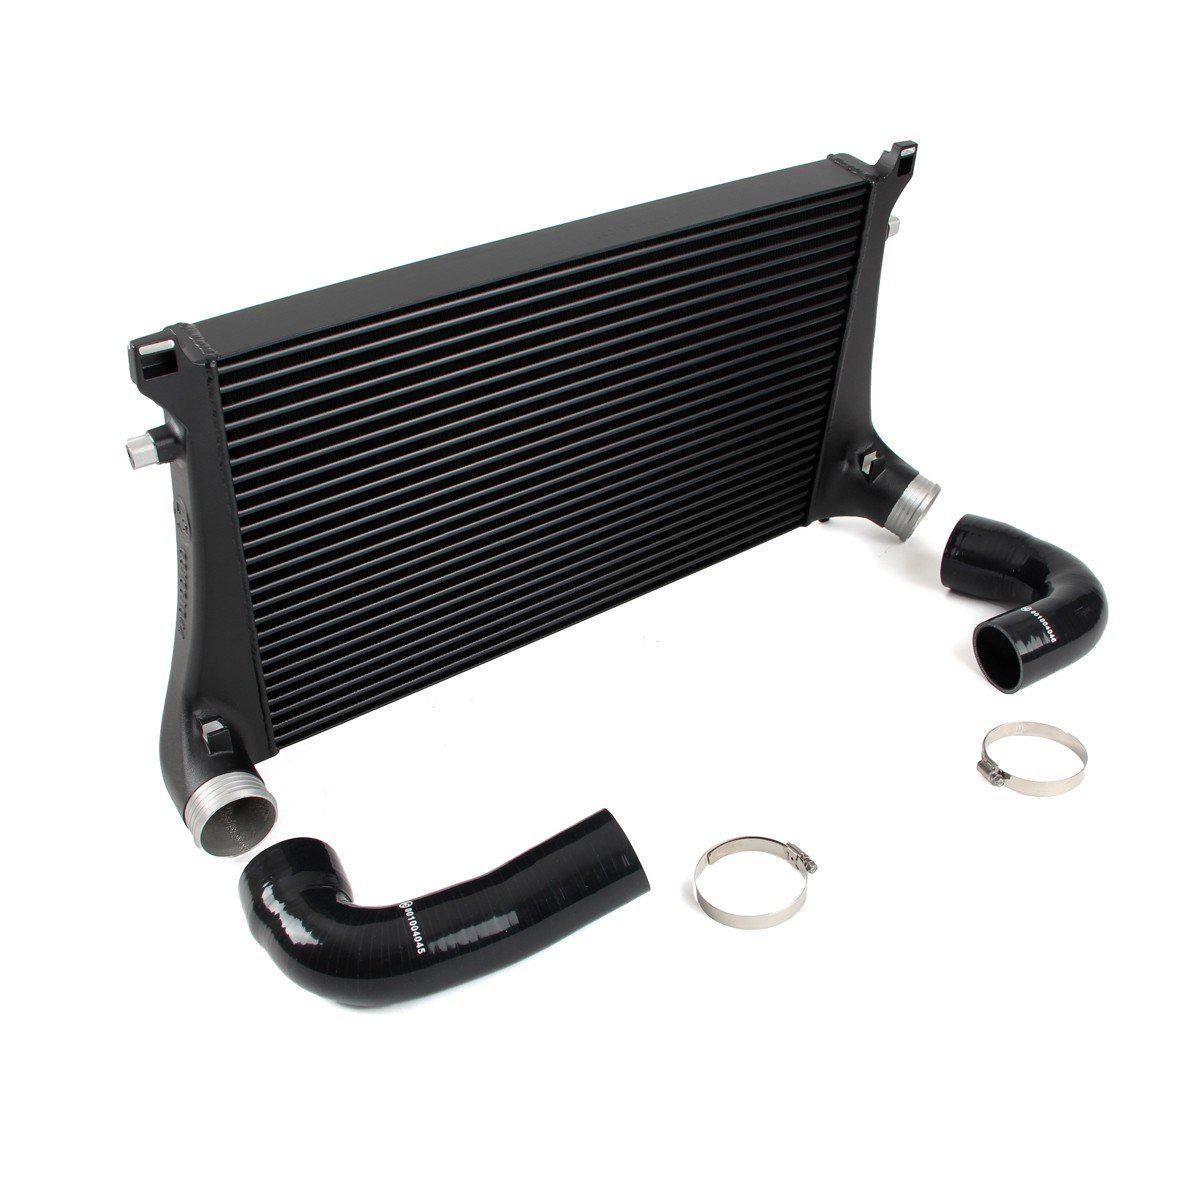 Wagner Tuning Competition Intercooler Kit For MKVII Volkswagen Golf/GTI/R & 8V Audi A3/S3 1.8T/2.0T Ea888 Gen3-A Little Tuning Co